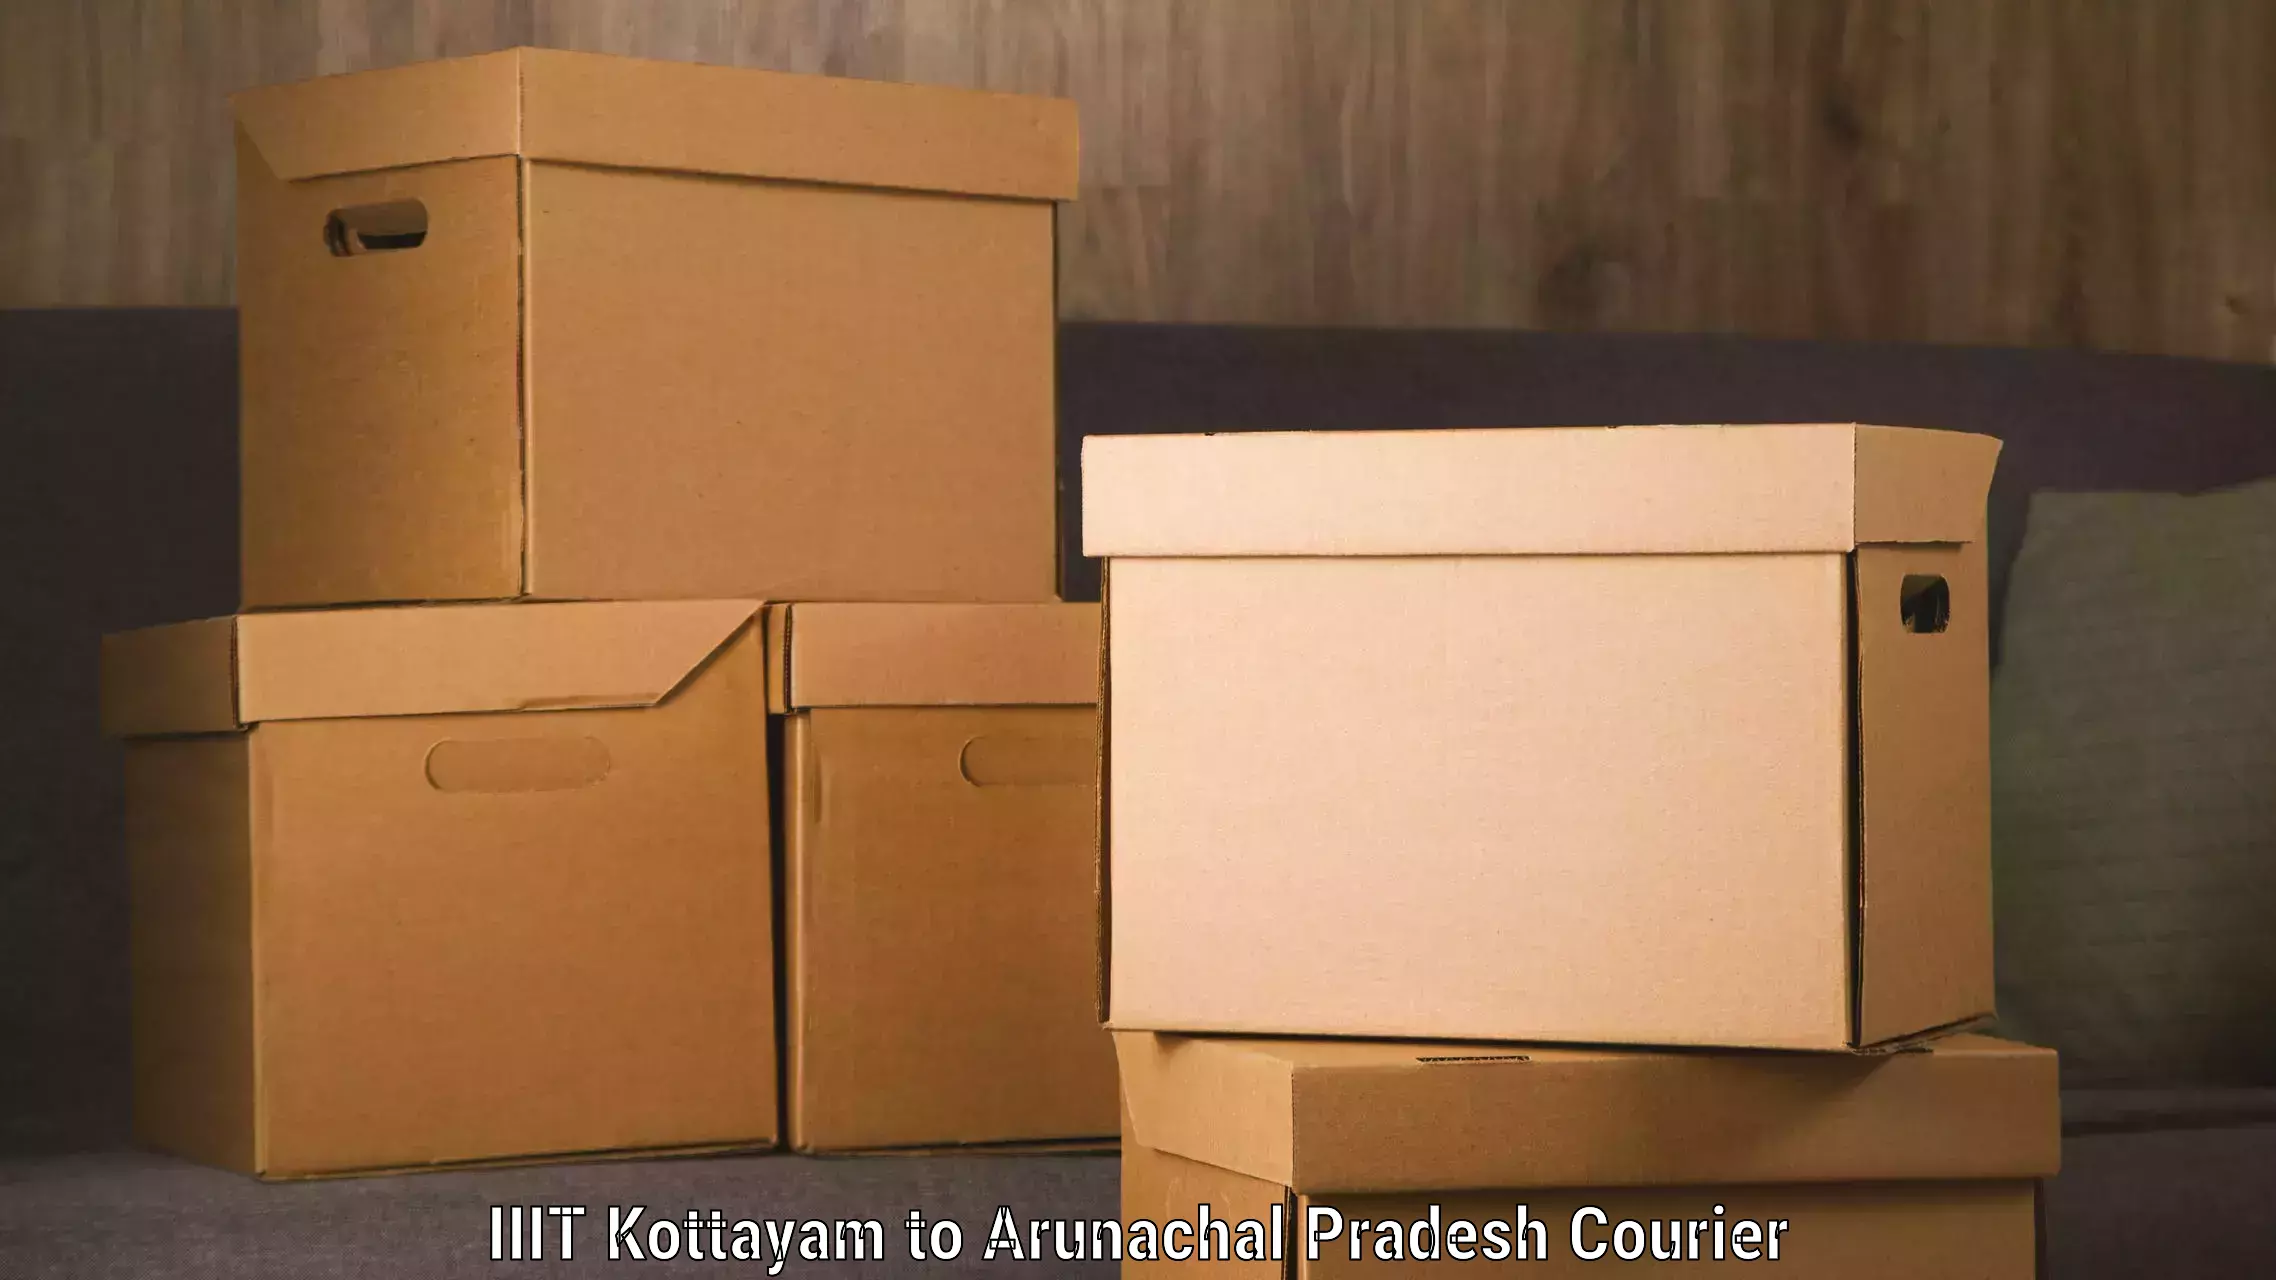 Reliable parcel services in IIIT Kottayam to Deomali